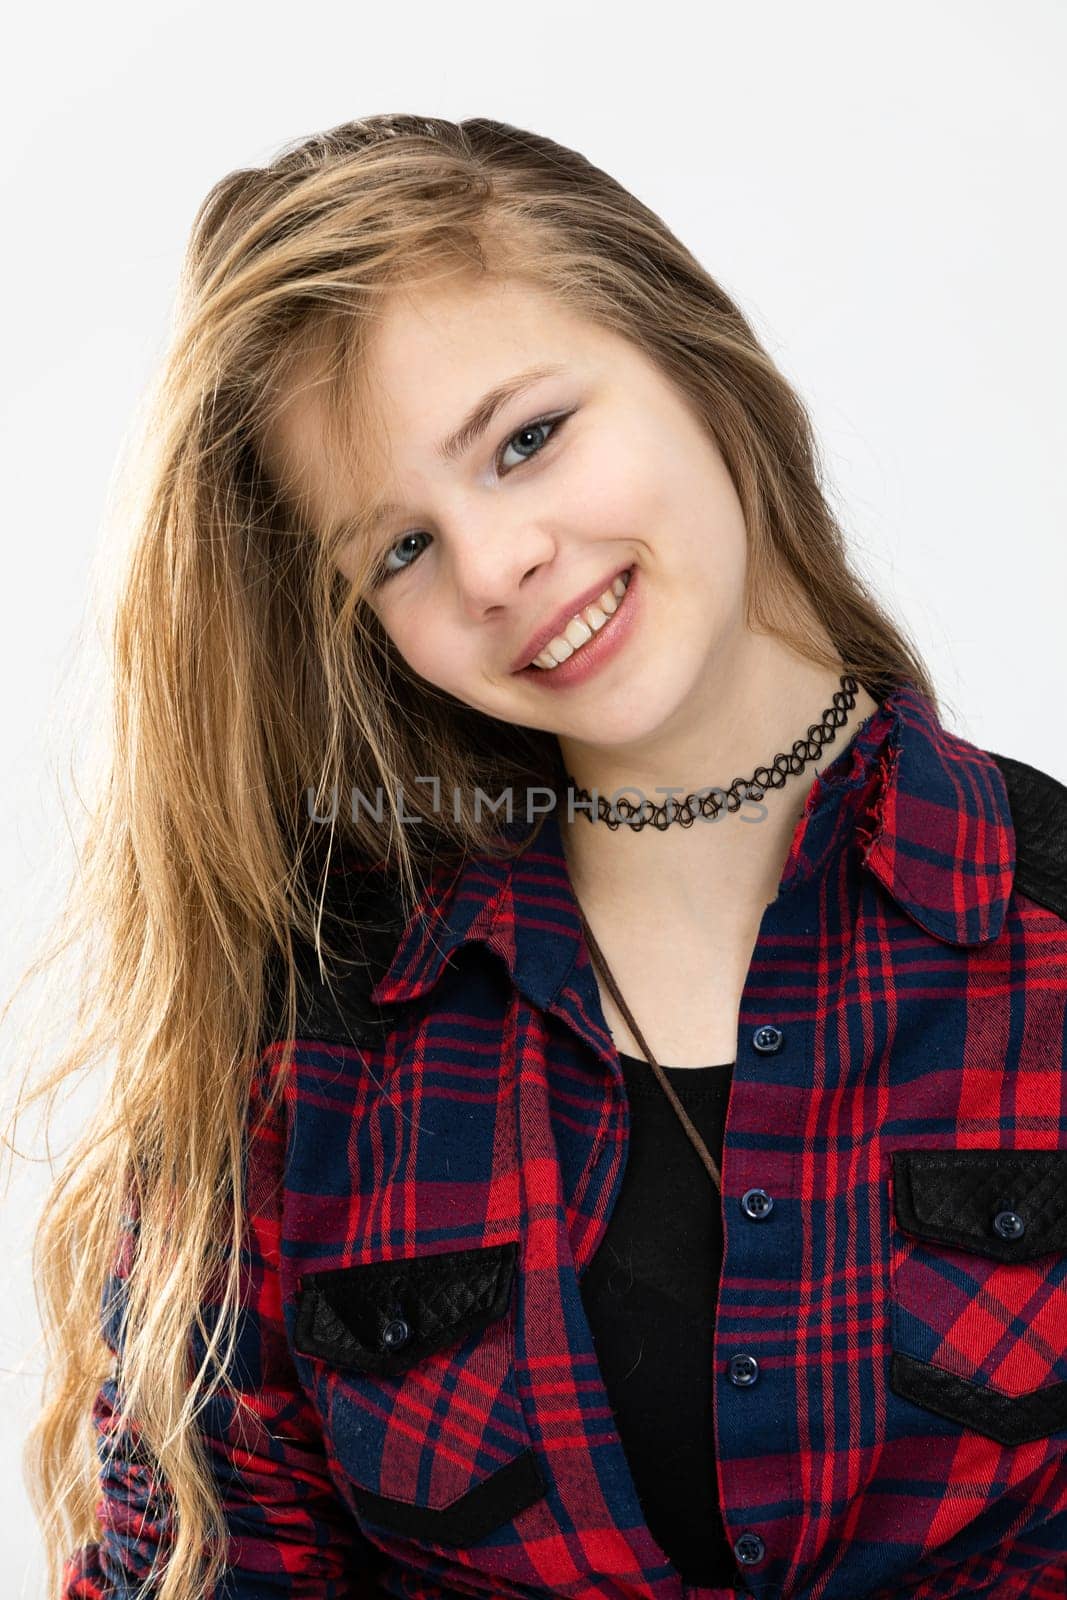 Close-up on the face of a girl who smiles revealing her teeth. A young girl dressed in a checkered shirt. The girl has long hair pulled to the side and tilts her head slightly.